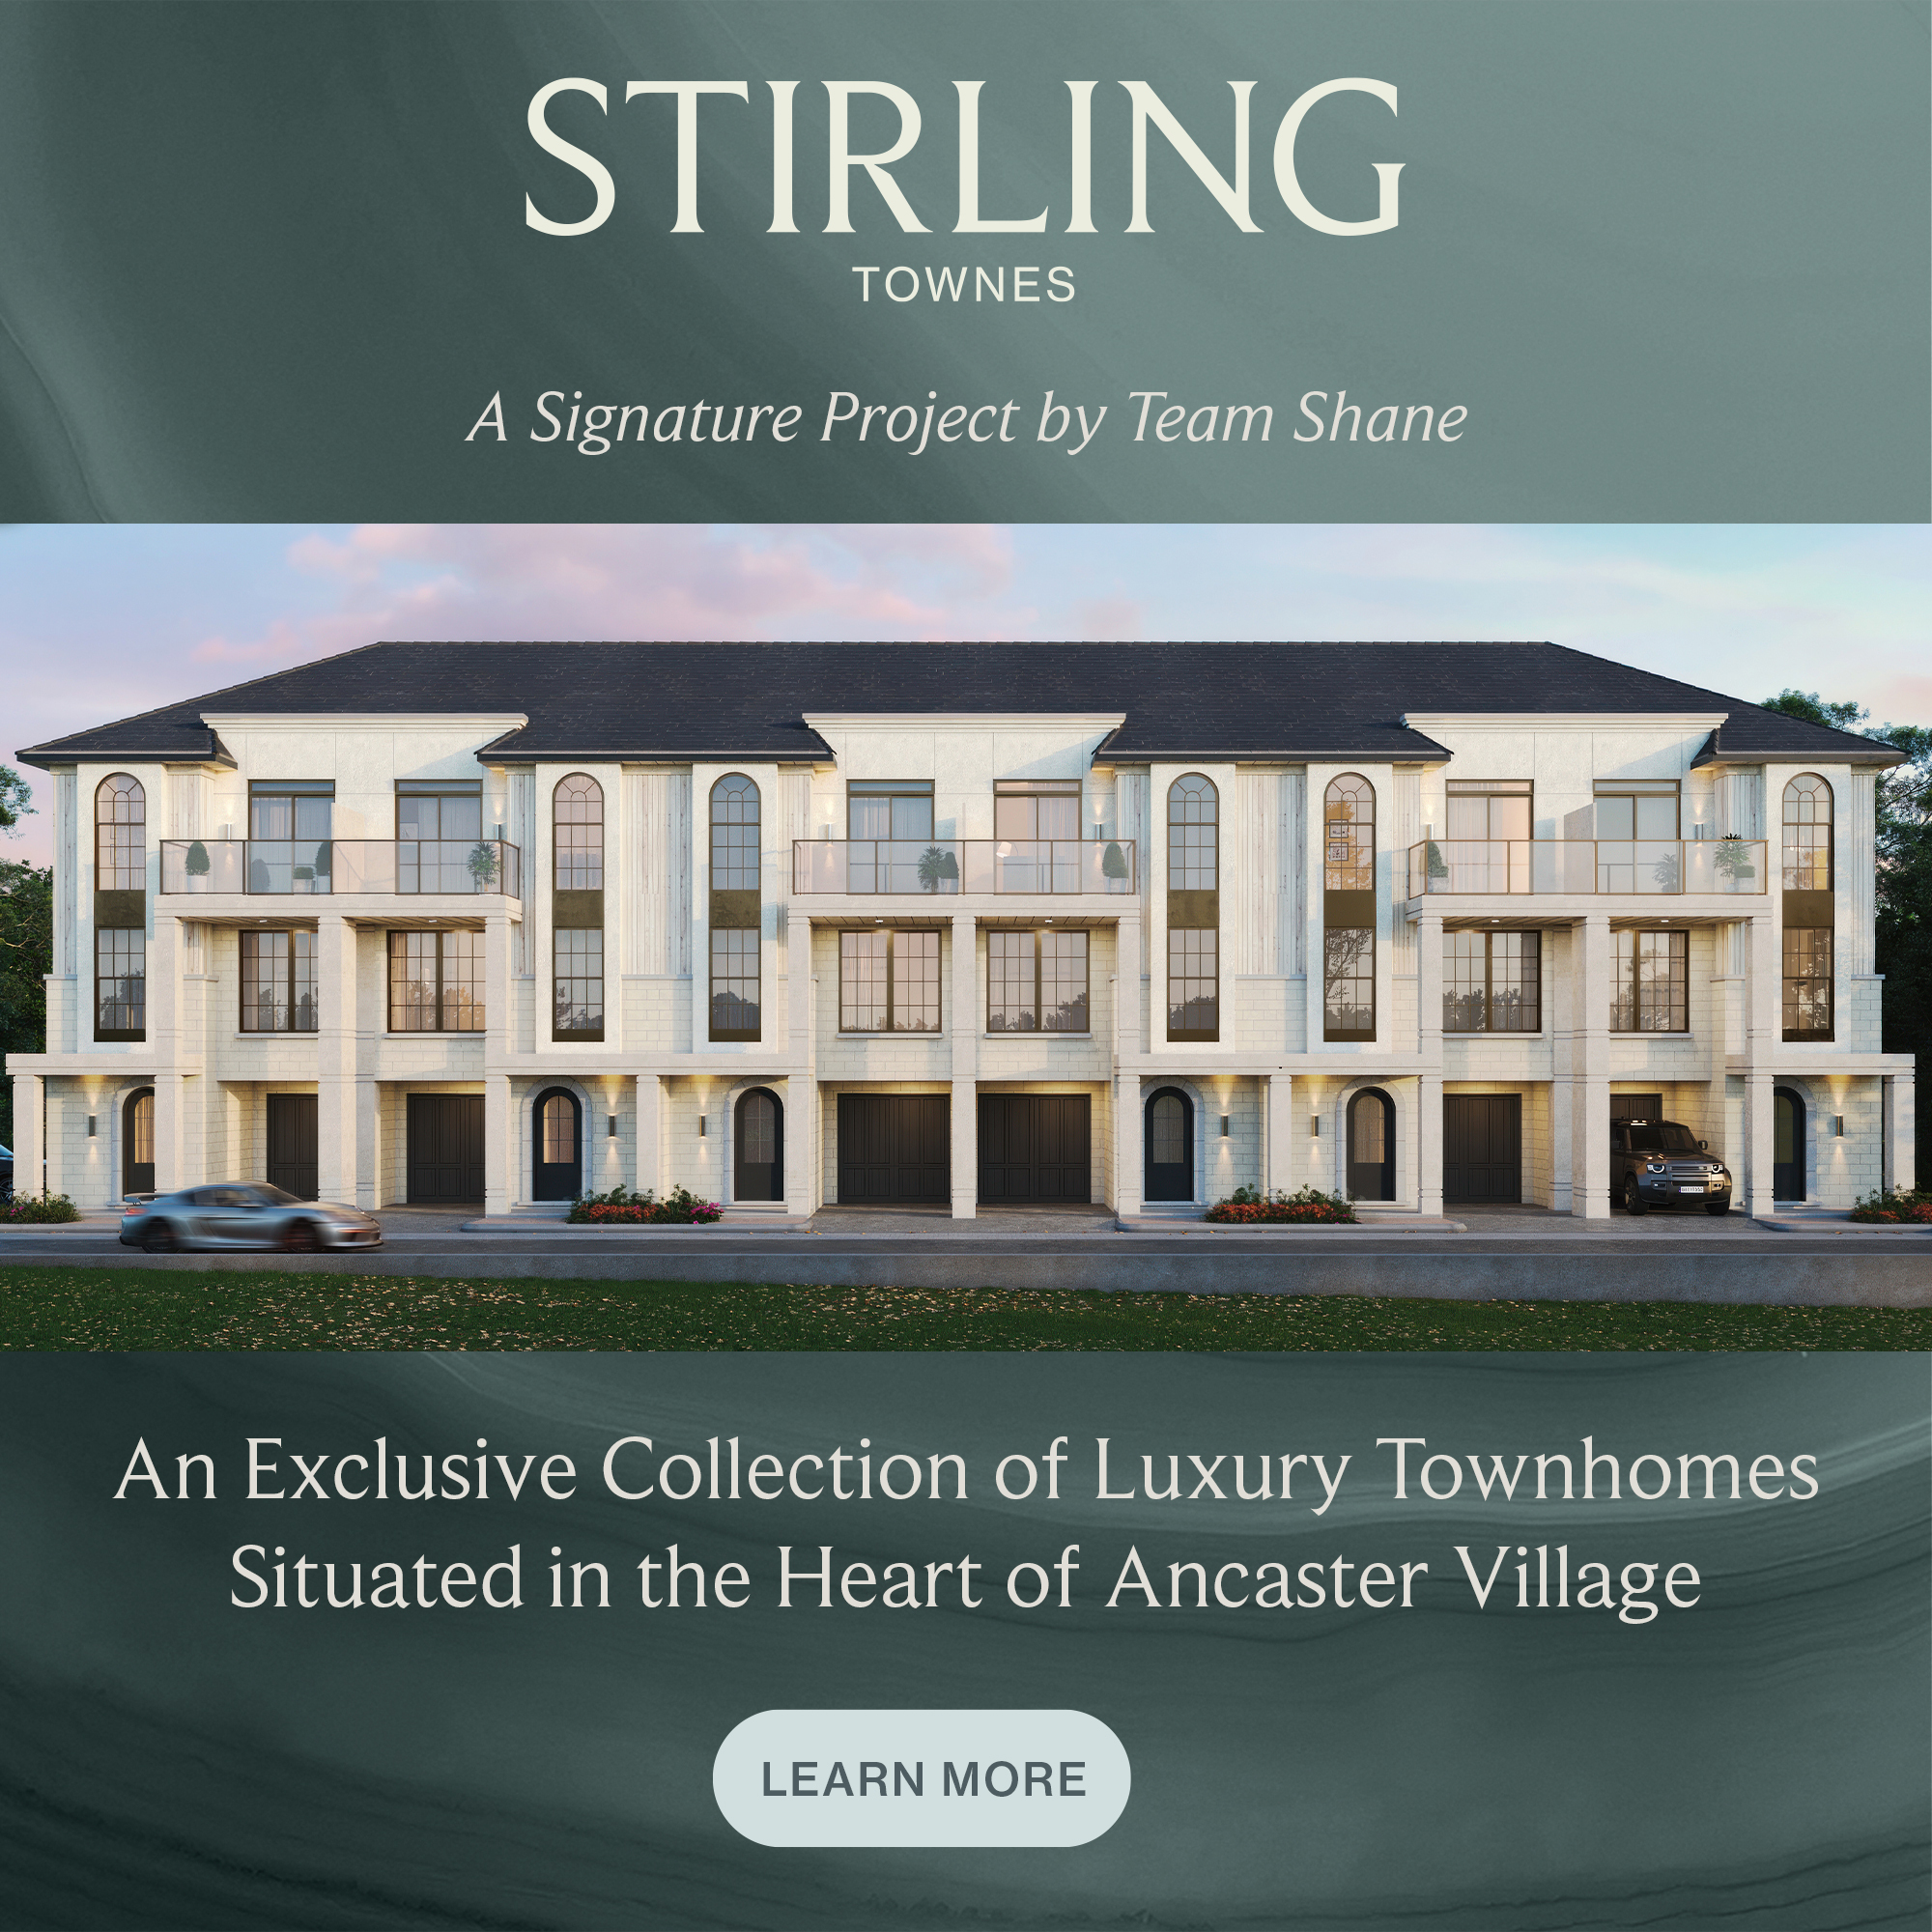 Stirling Townes Announcement Popup